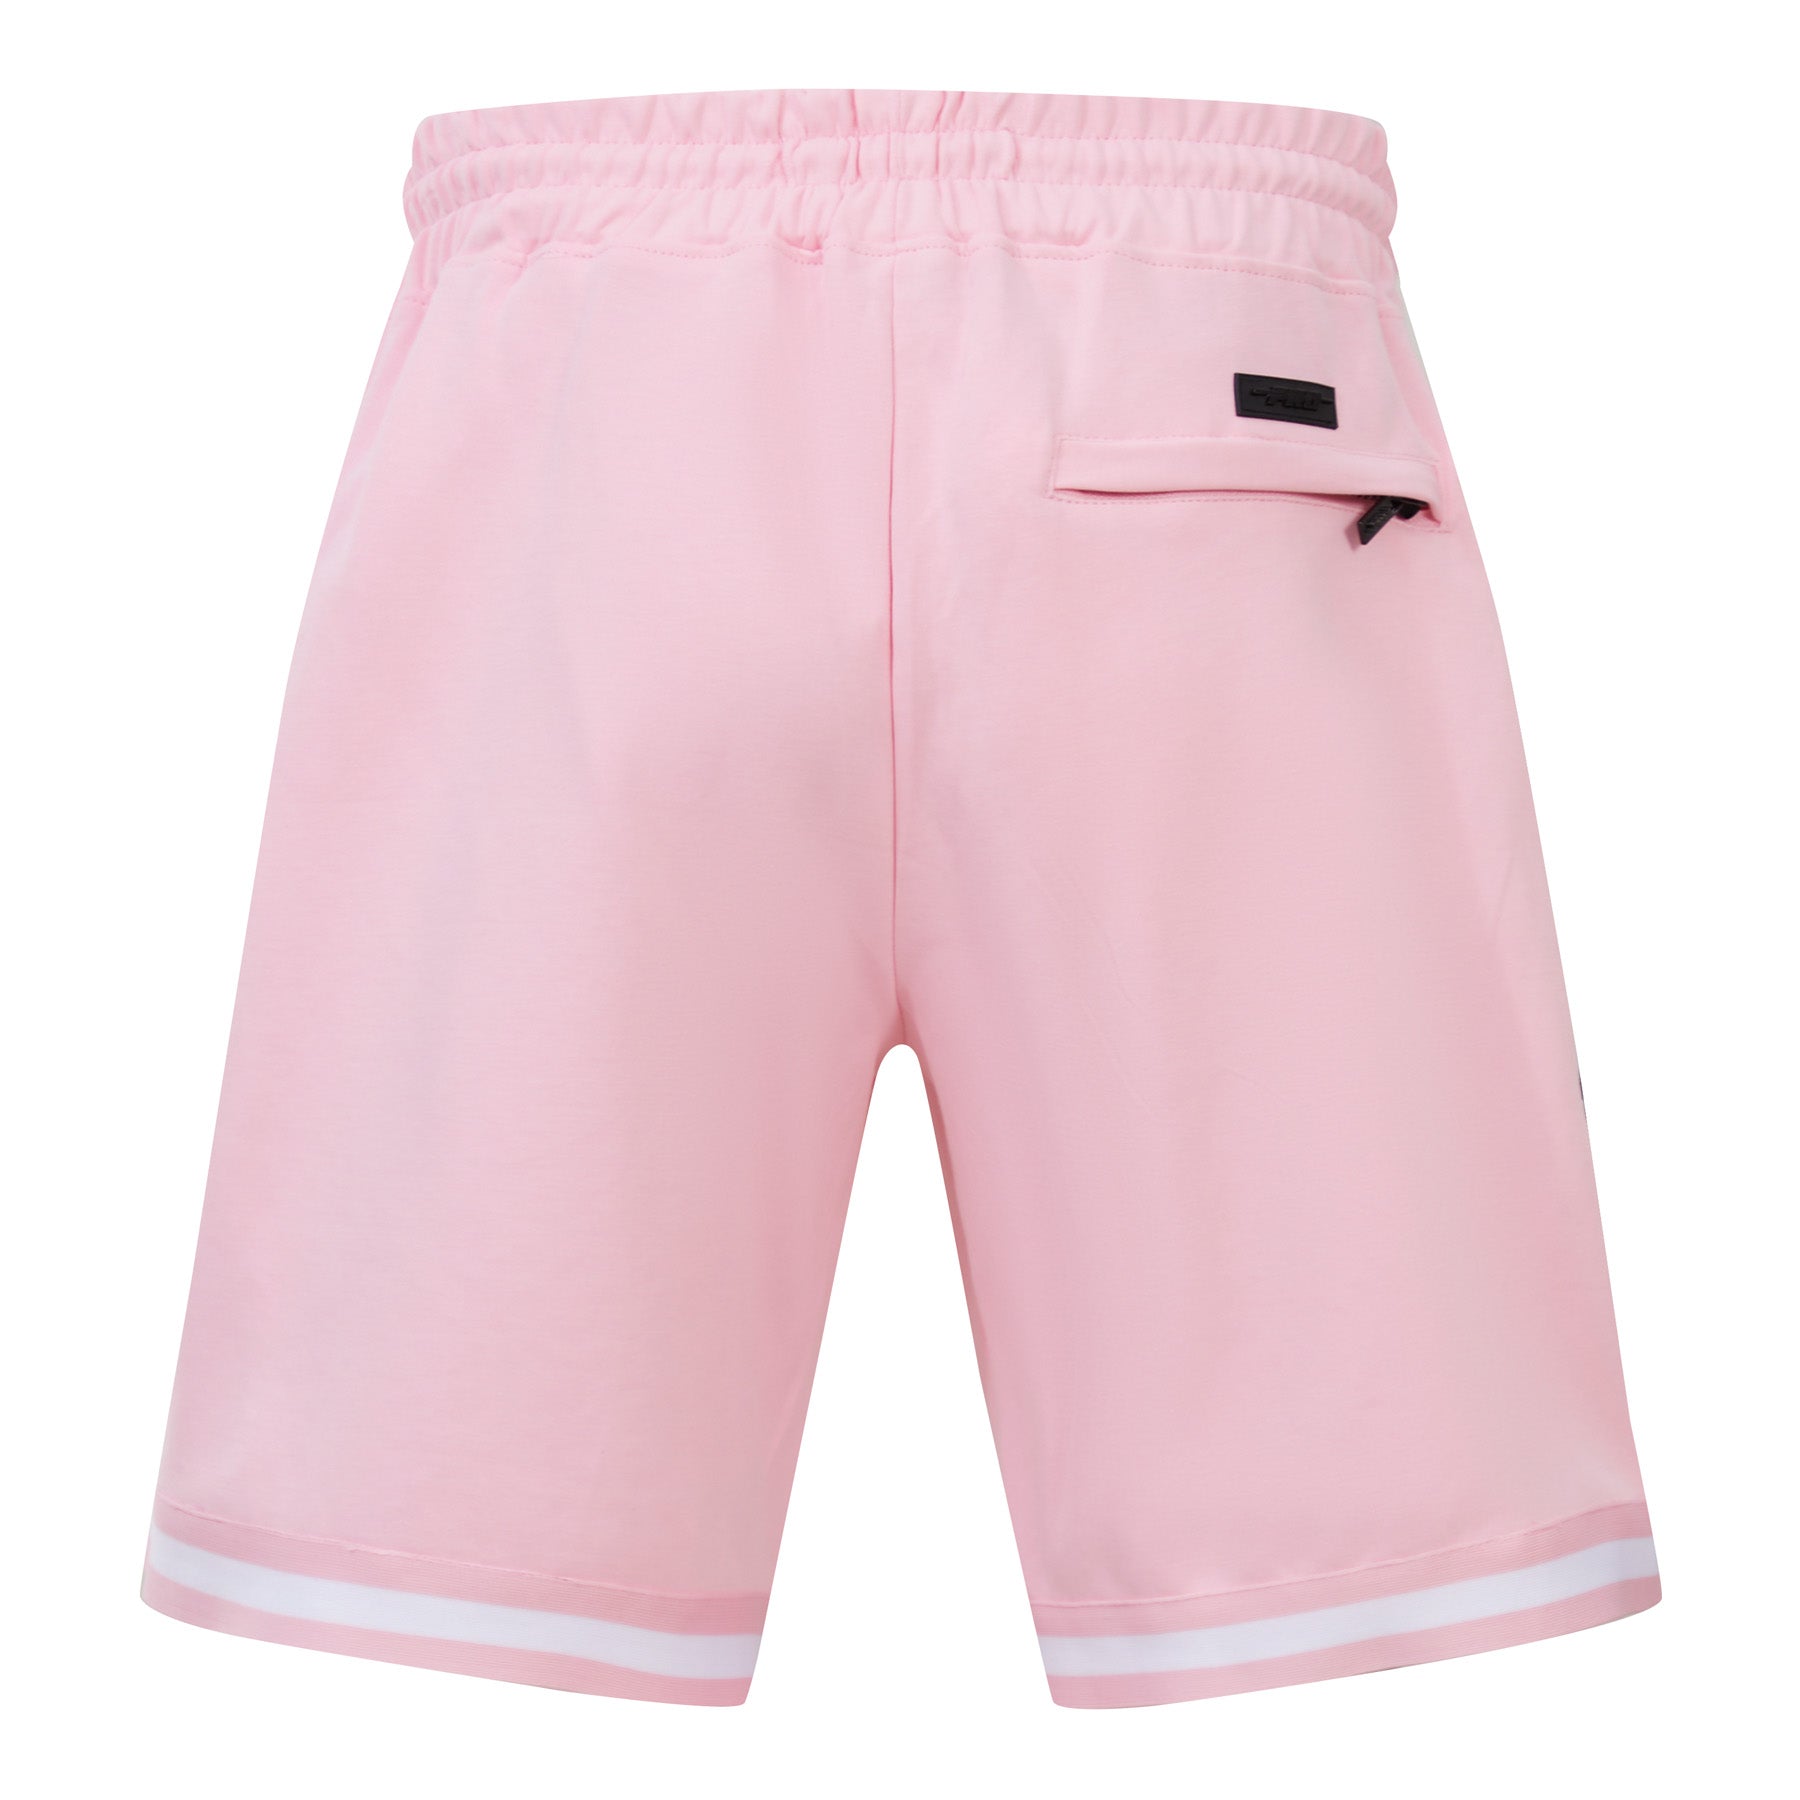 CHICAGO WHITE SOX CLASSIC CHENILLE DK SHORT (PINK) – Pro Standard